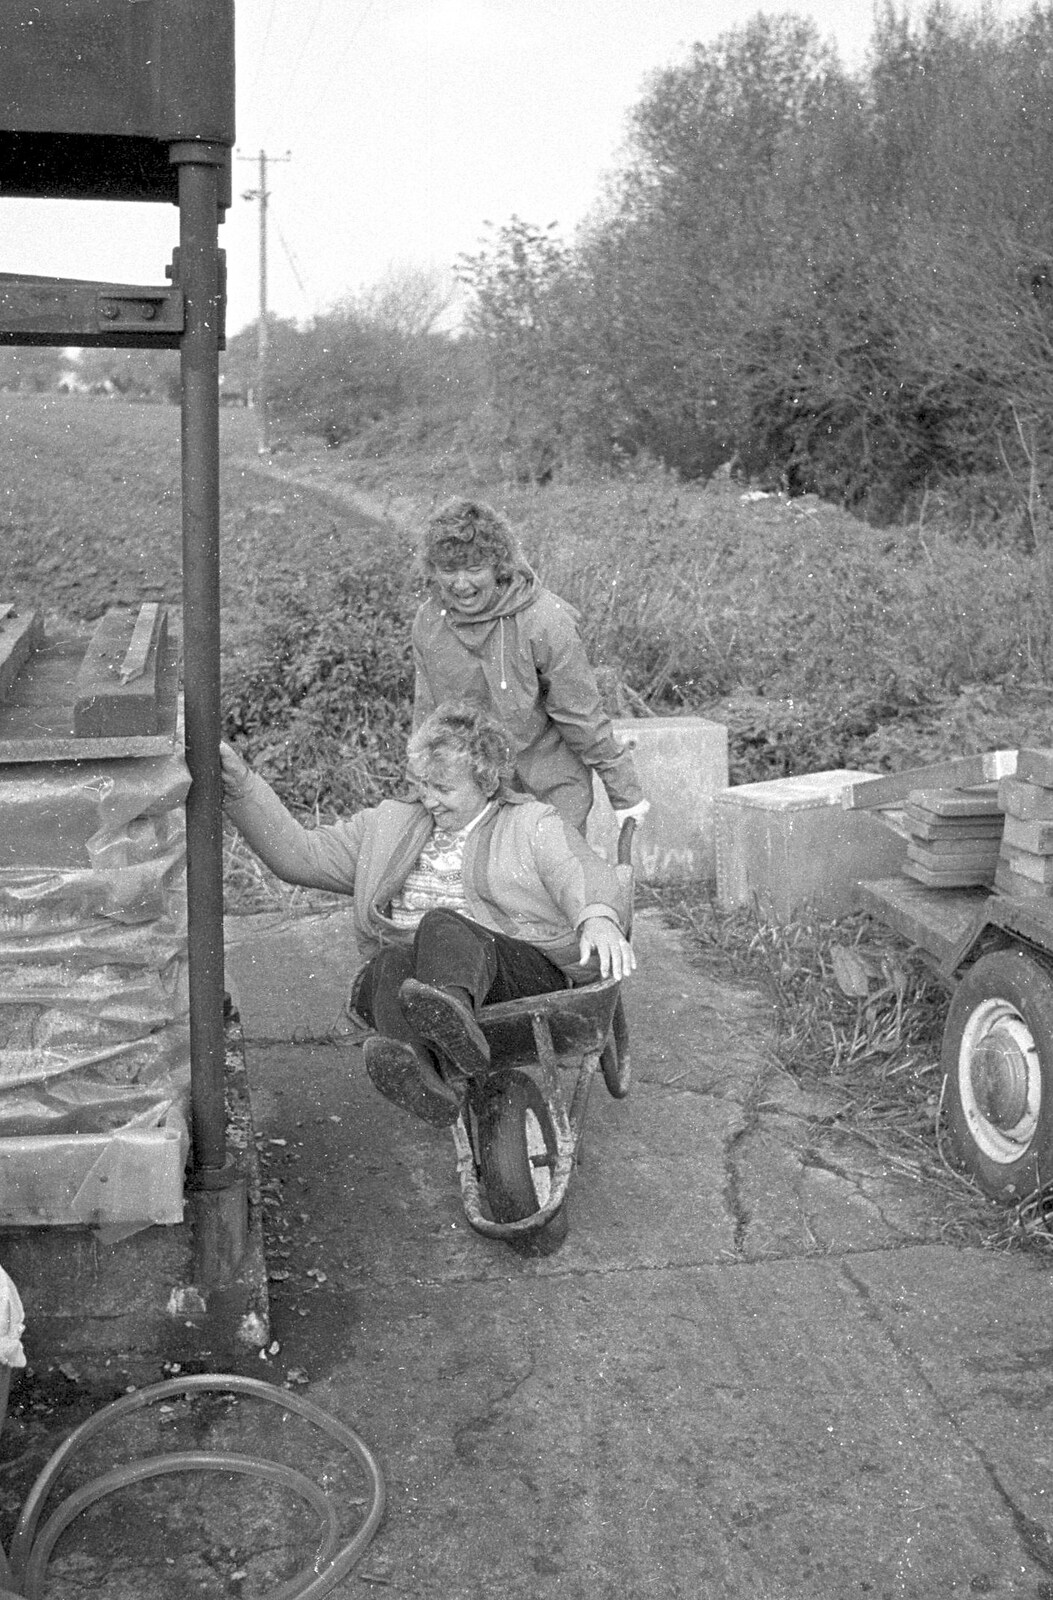 Linda gets wheeled about in a barrow from Cider Making in Black and White, Stuston, Suffolk - 11th October 1992